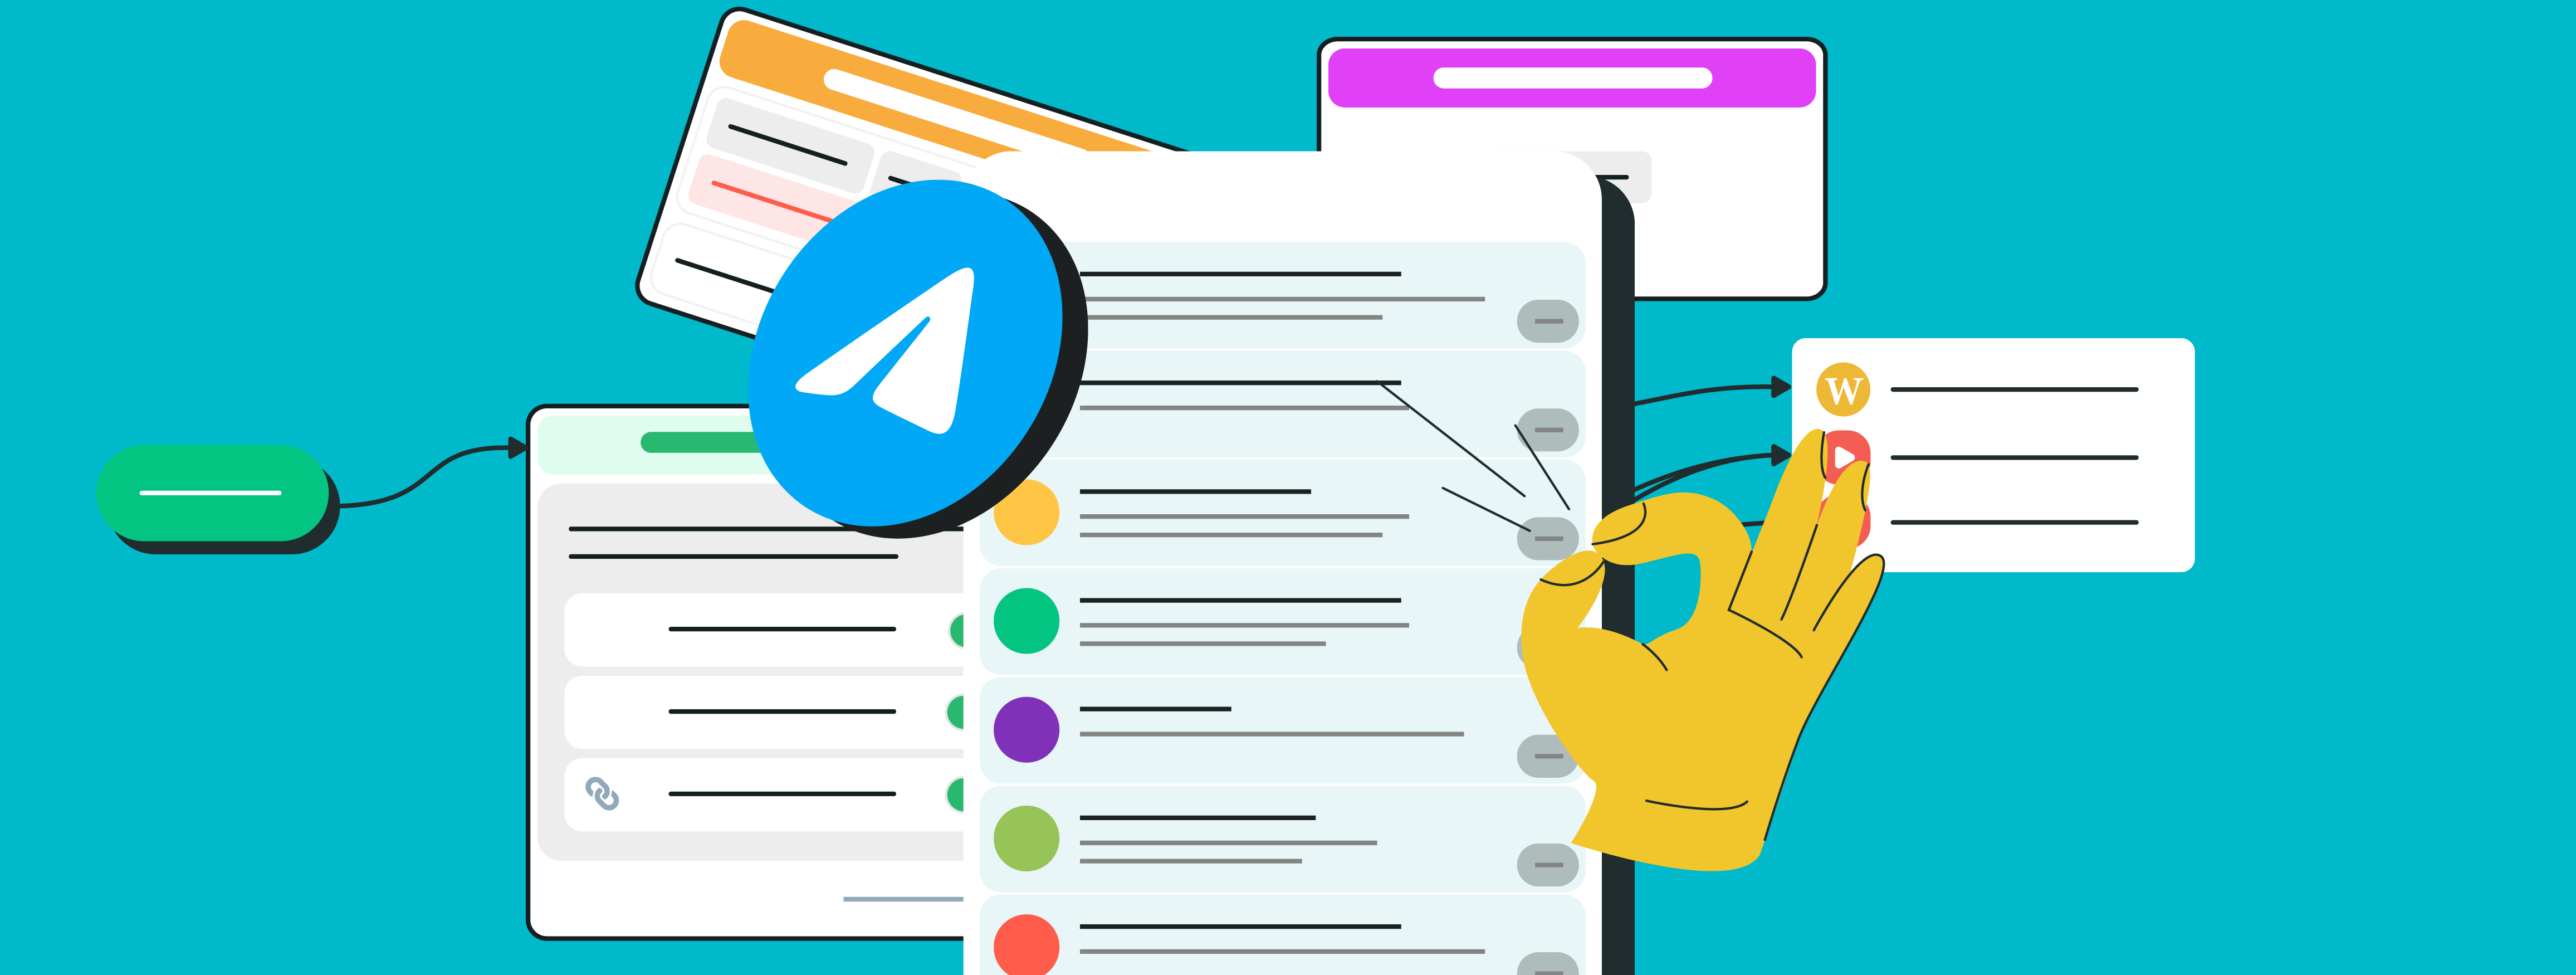 Telegram Group: All You Need to Know About Telegram Groups [Dec 2022]